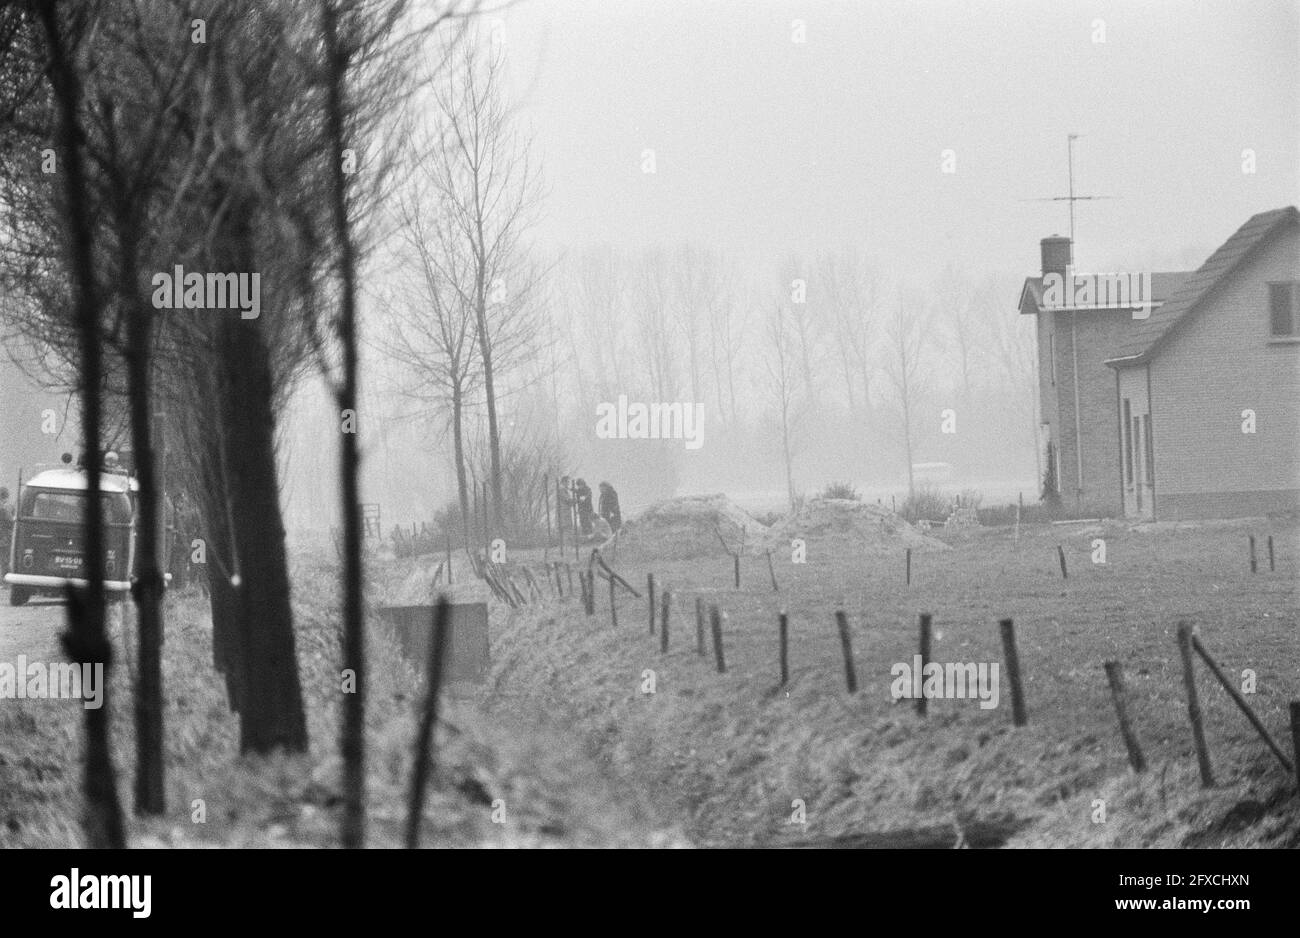 Post office robbers take family hostage in farmhouse in Deil, the farmhouse and outside the robbers being searched, 30 January 1973, farms, families, hostages, The Netherlands, 20th century press agency photo, news to remember, documentary, historic photography 1945-1990, visual stories, human history of the Twentieth Century, capturing moments in time Stock Photo